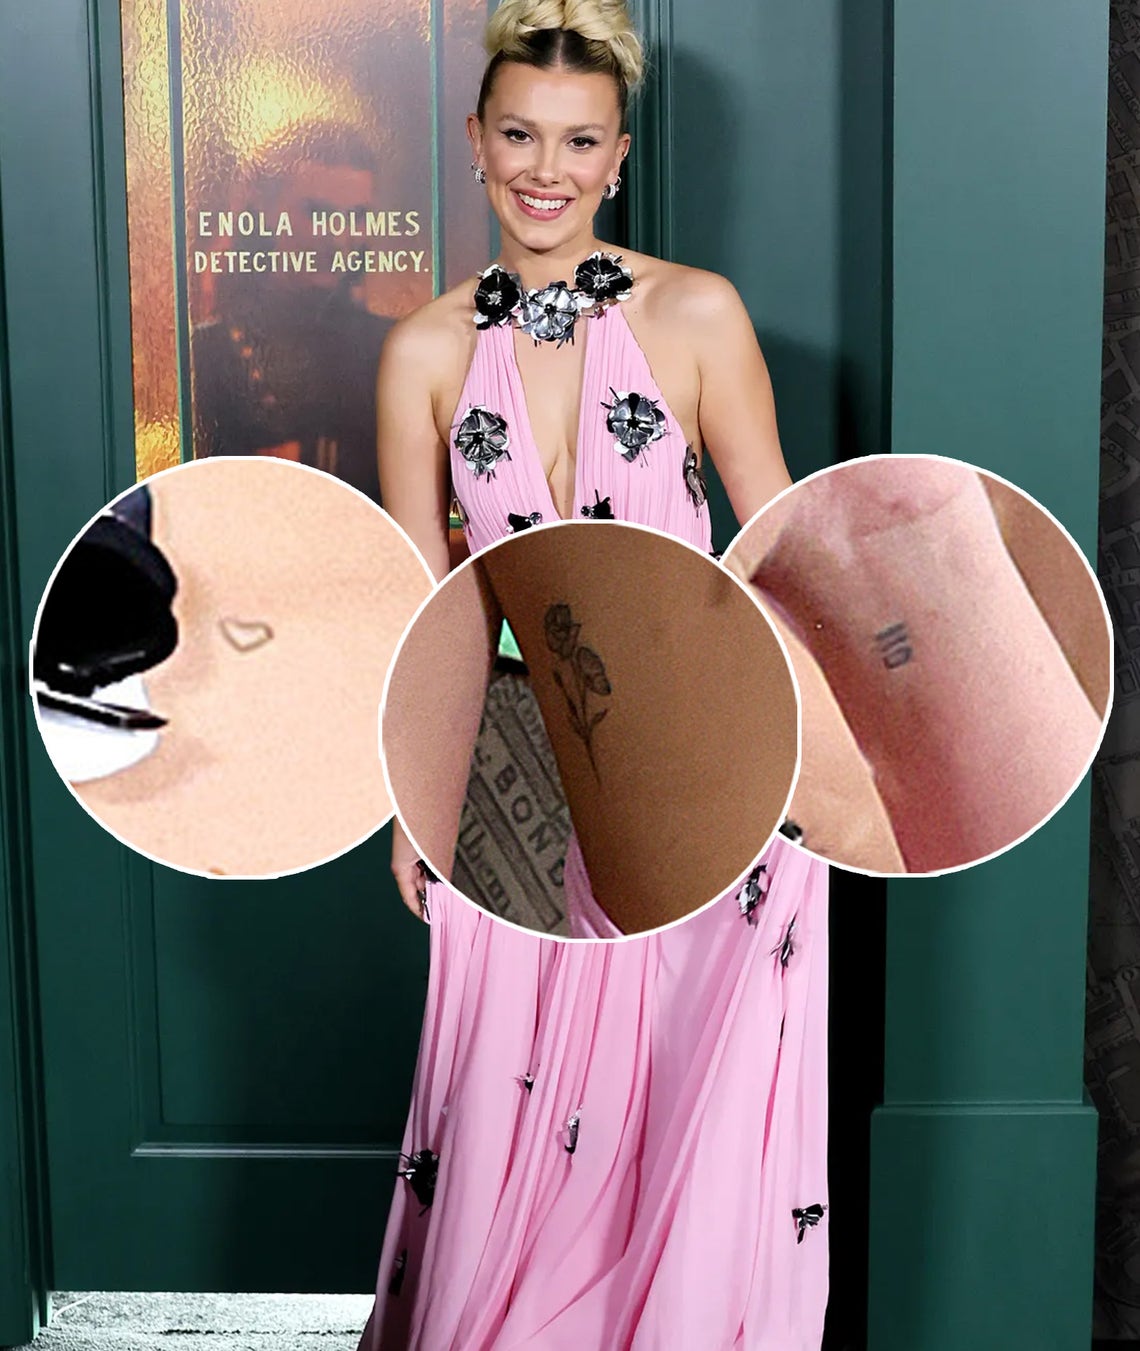 Millie Bobby Brown flashes tattoos at Enola Holmes 2 premiere